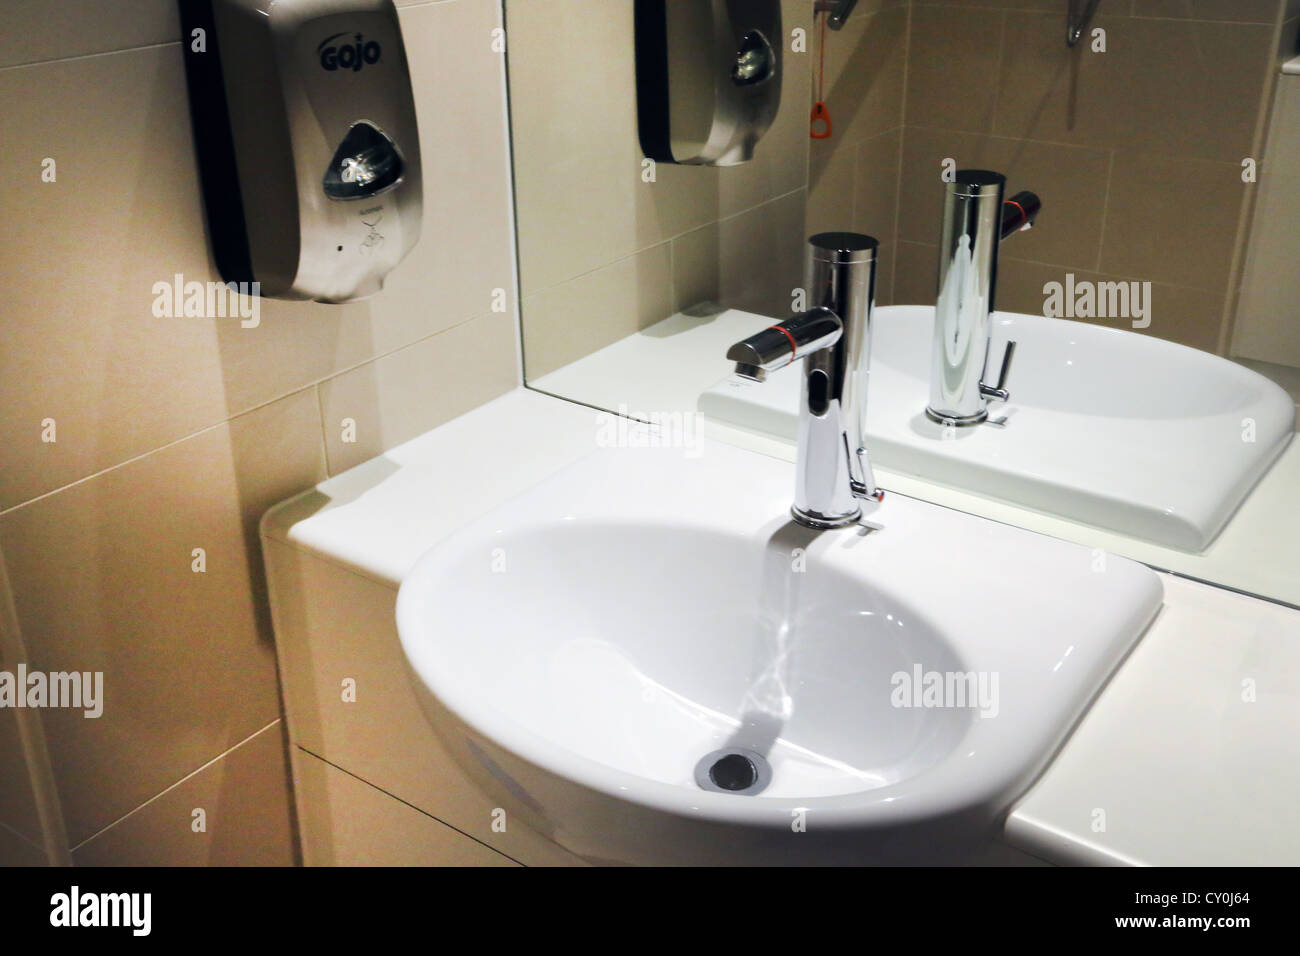 Washbasin With Motion Detector Tap And Soap Dispenser Stock Photo